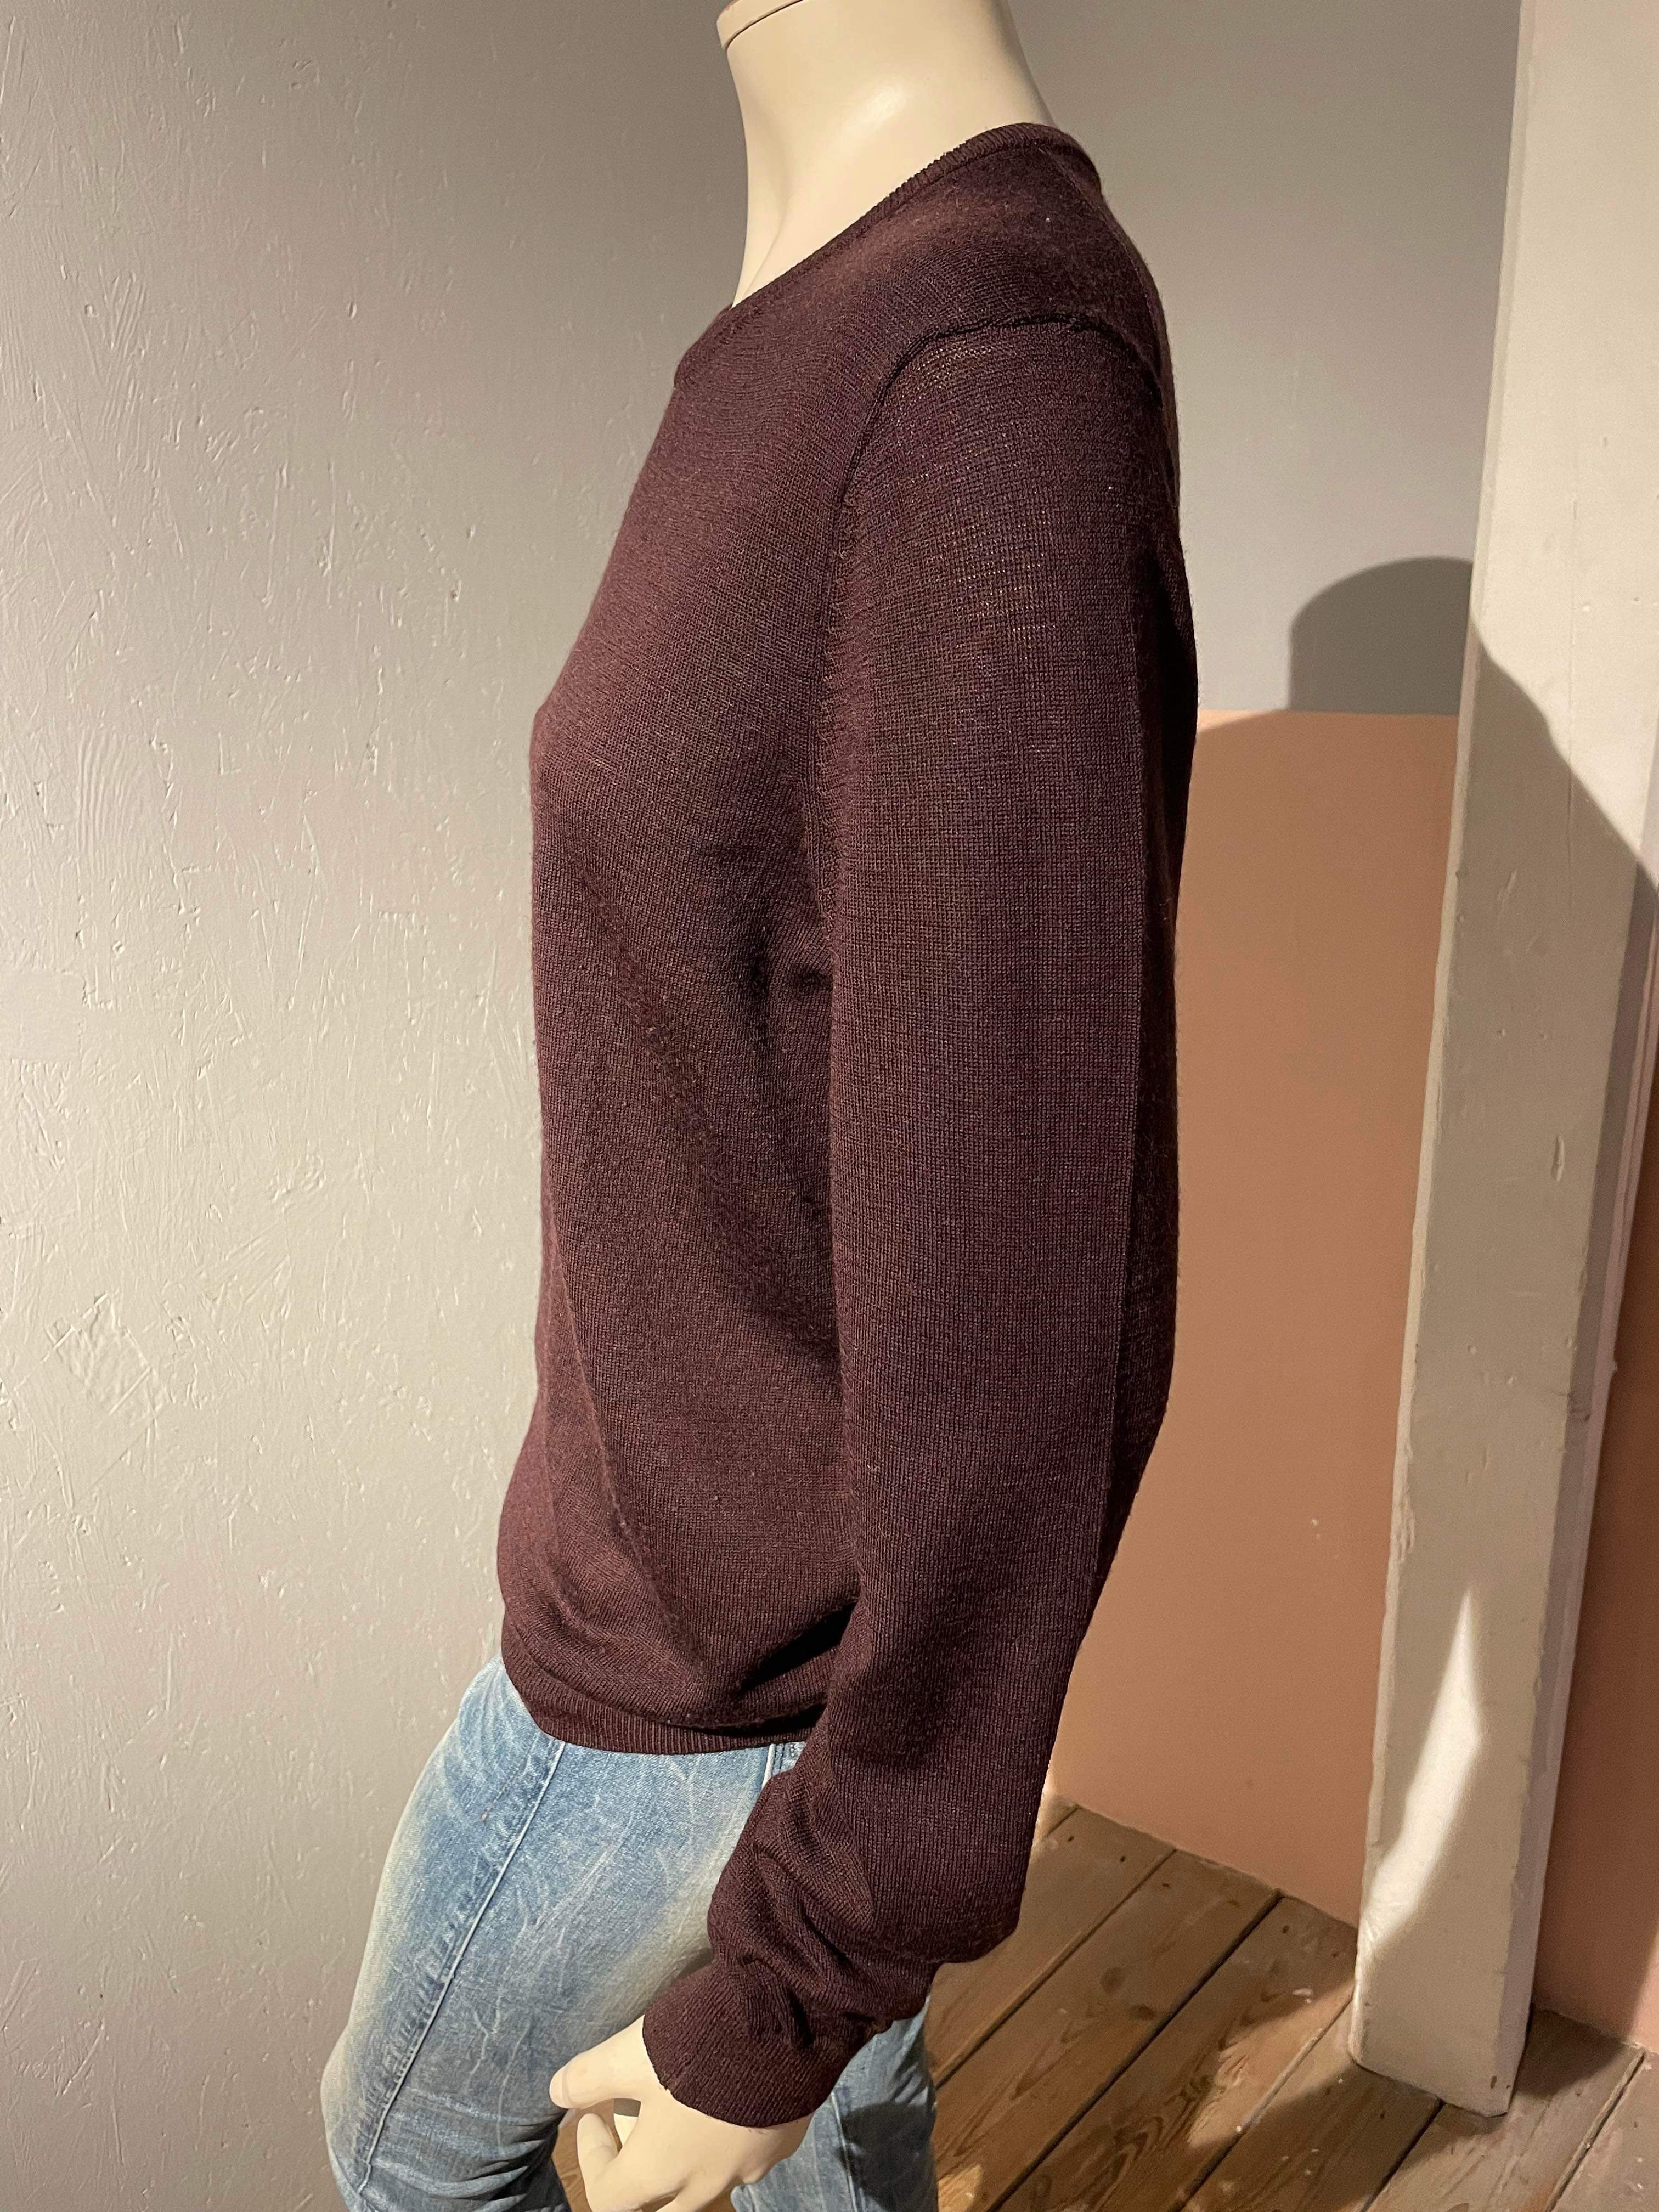 H&M - Sweater - Size: S